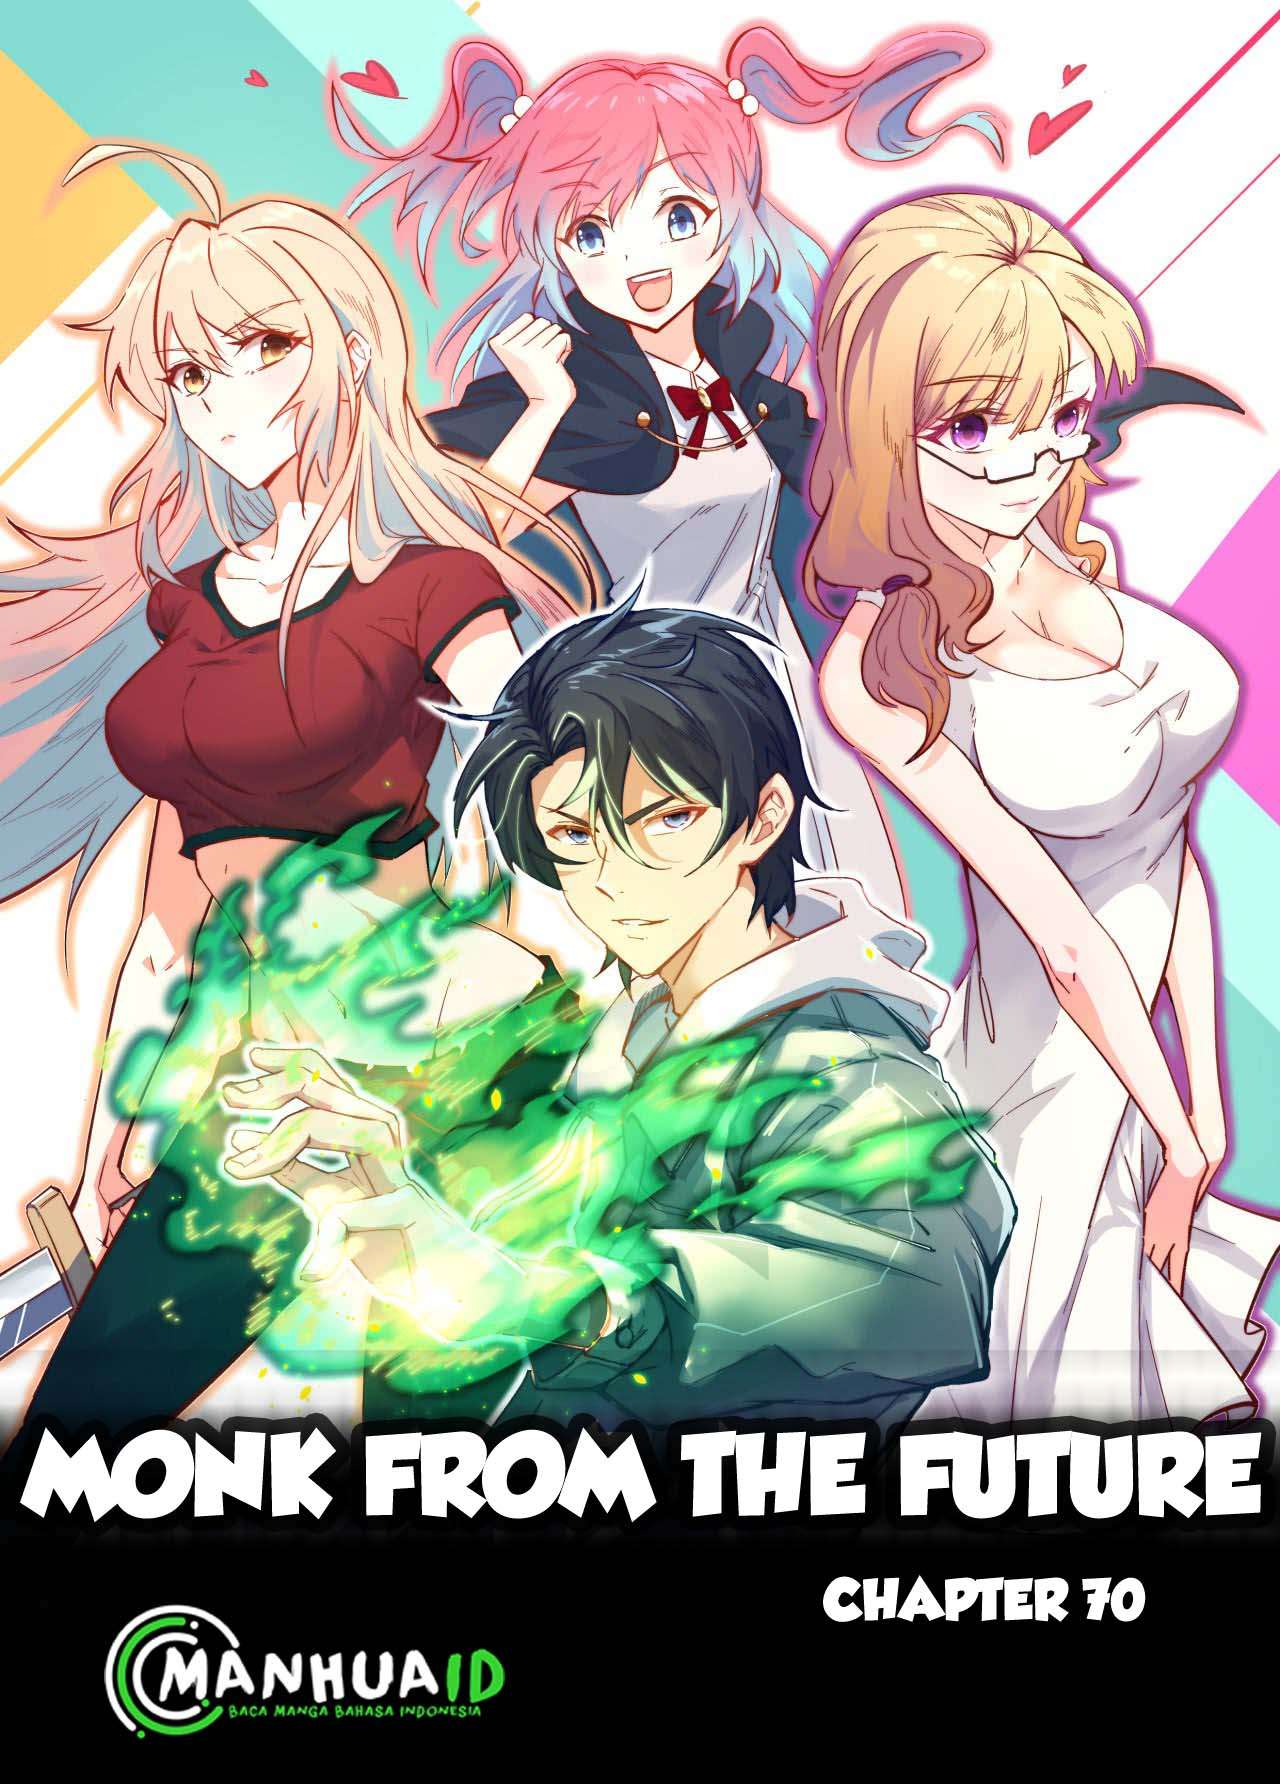 Monk From the Future Chapter 70